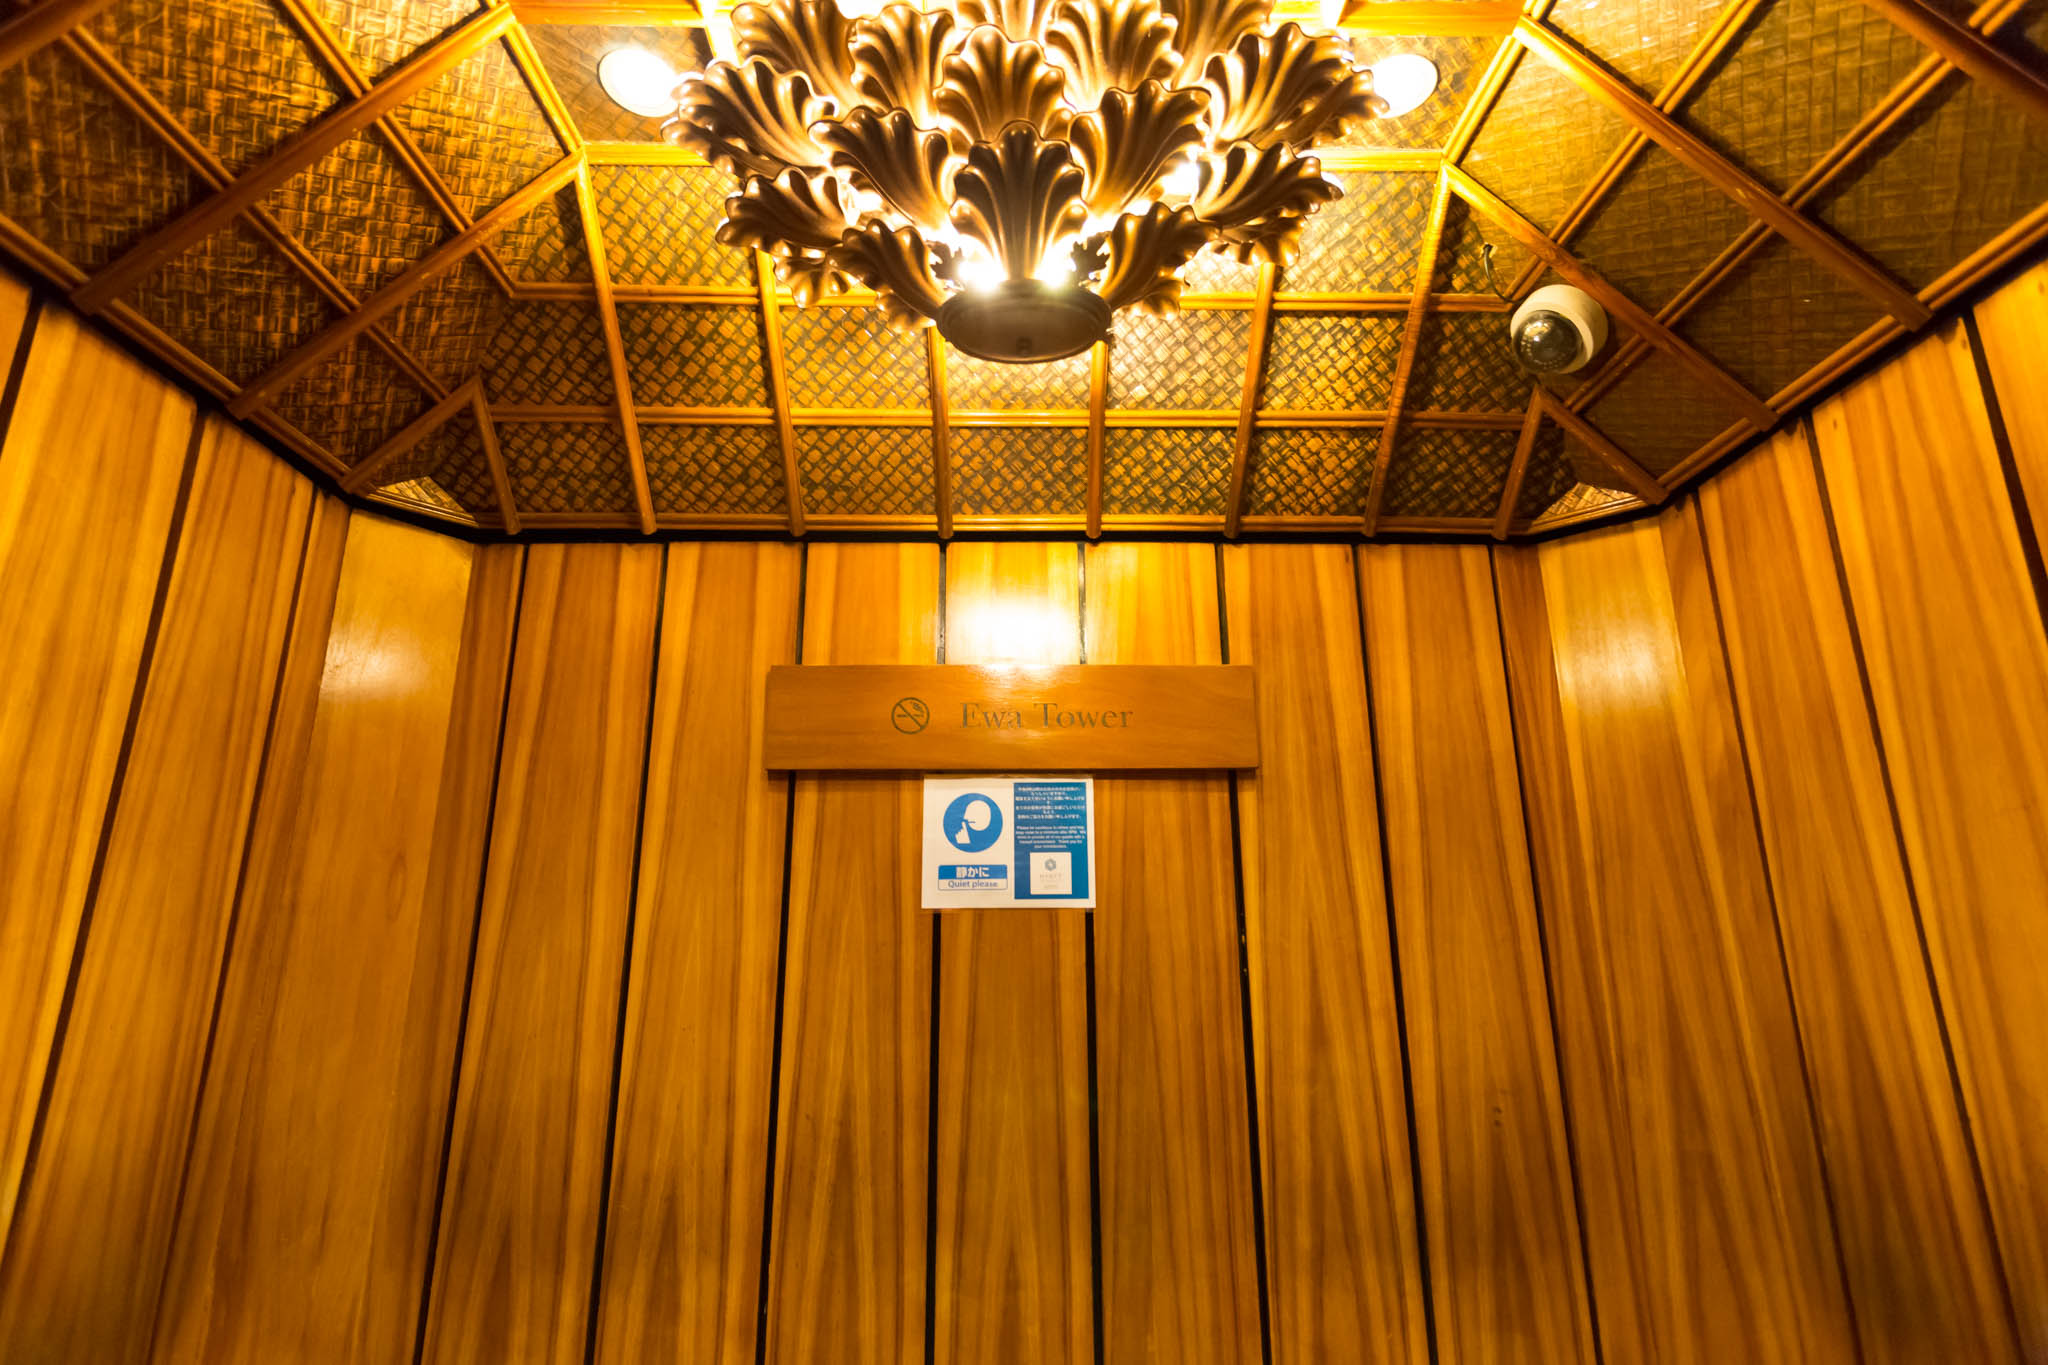 a wooden paneled elevator with a light fixture